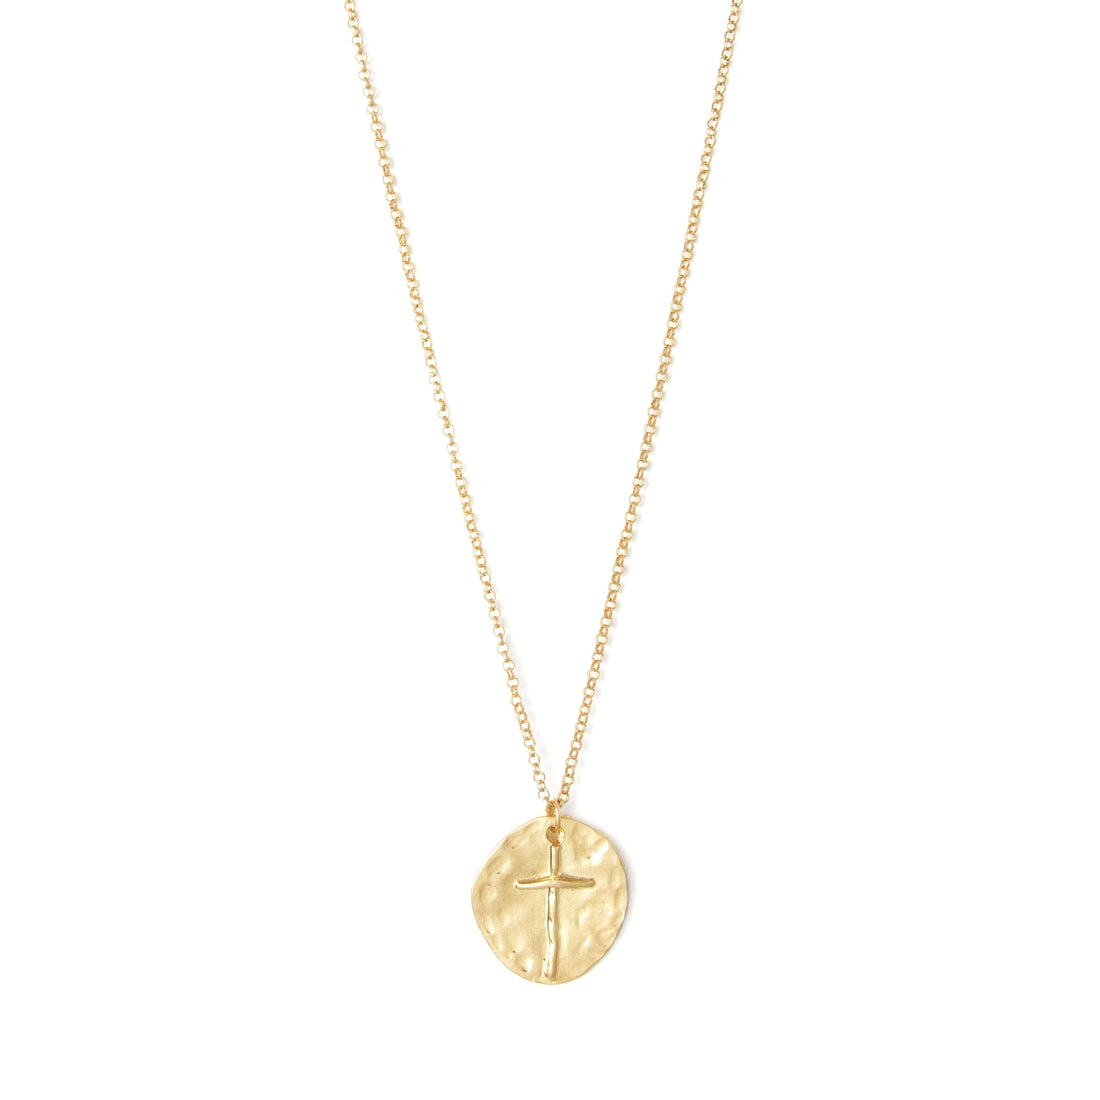 Hammered Cross Necklace - Gold